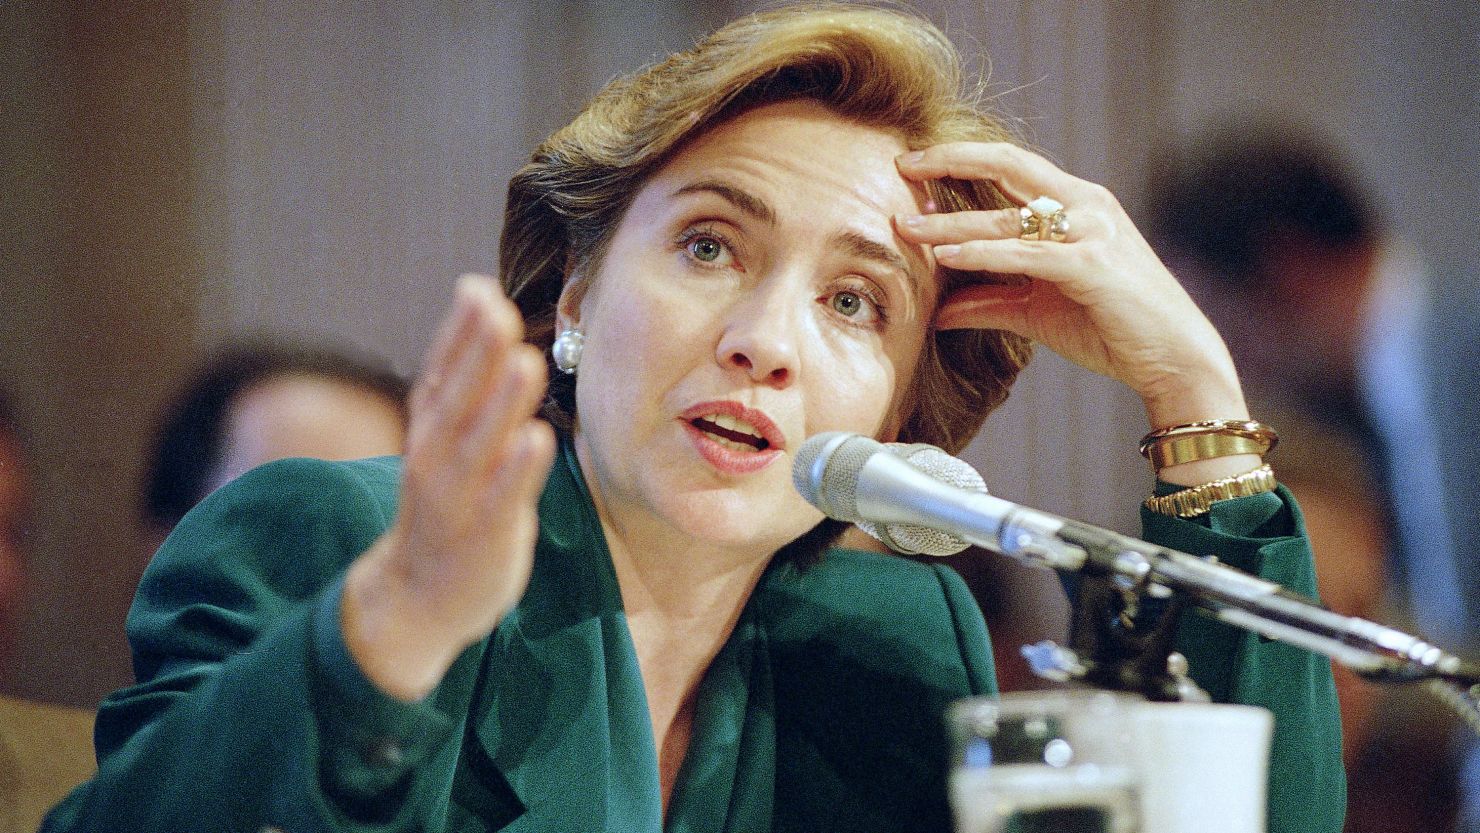 First Lady Hillary Rodham Clinton gestures while testifying on Capitol Hill in Washington Thursday, Sept. 30, 1993, before the Senate Finance Committee which was holding hearings on health care reform. (AP Photo/John Duricka)